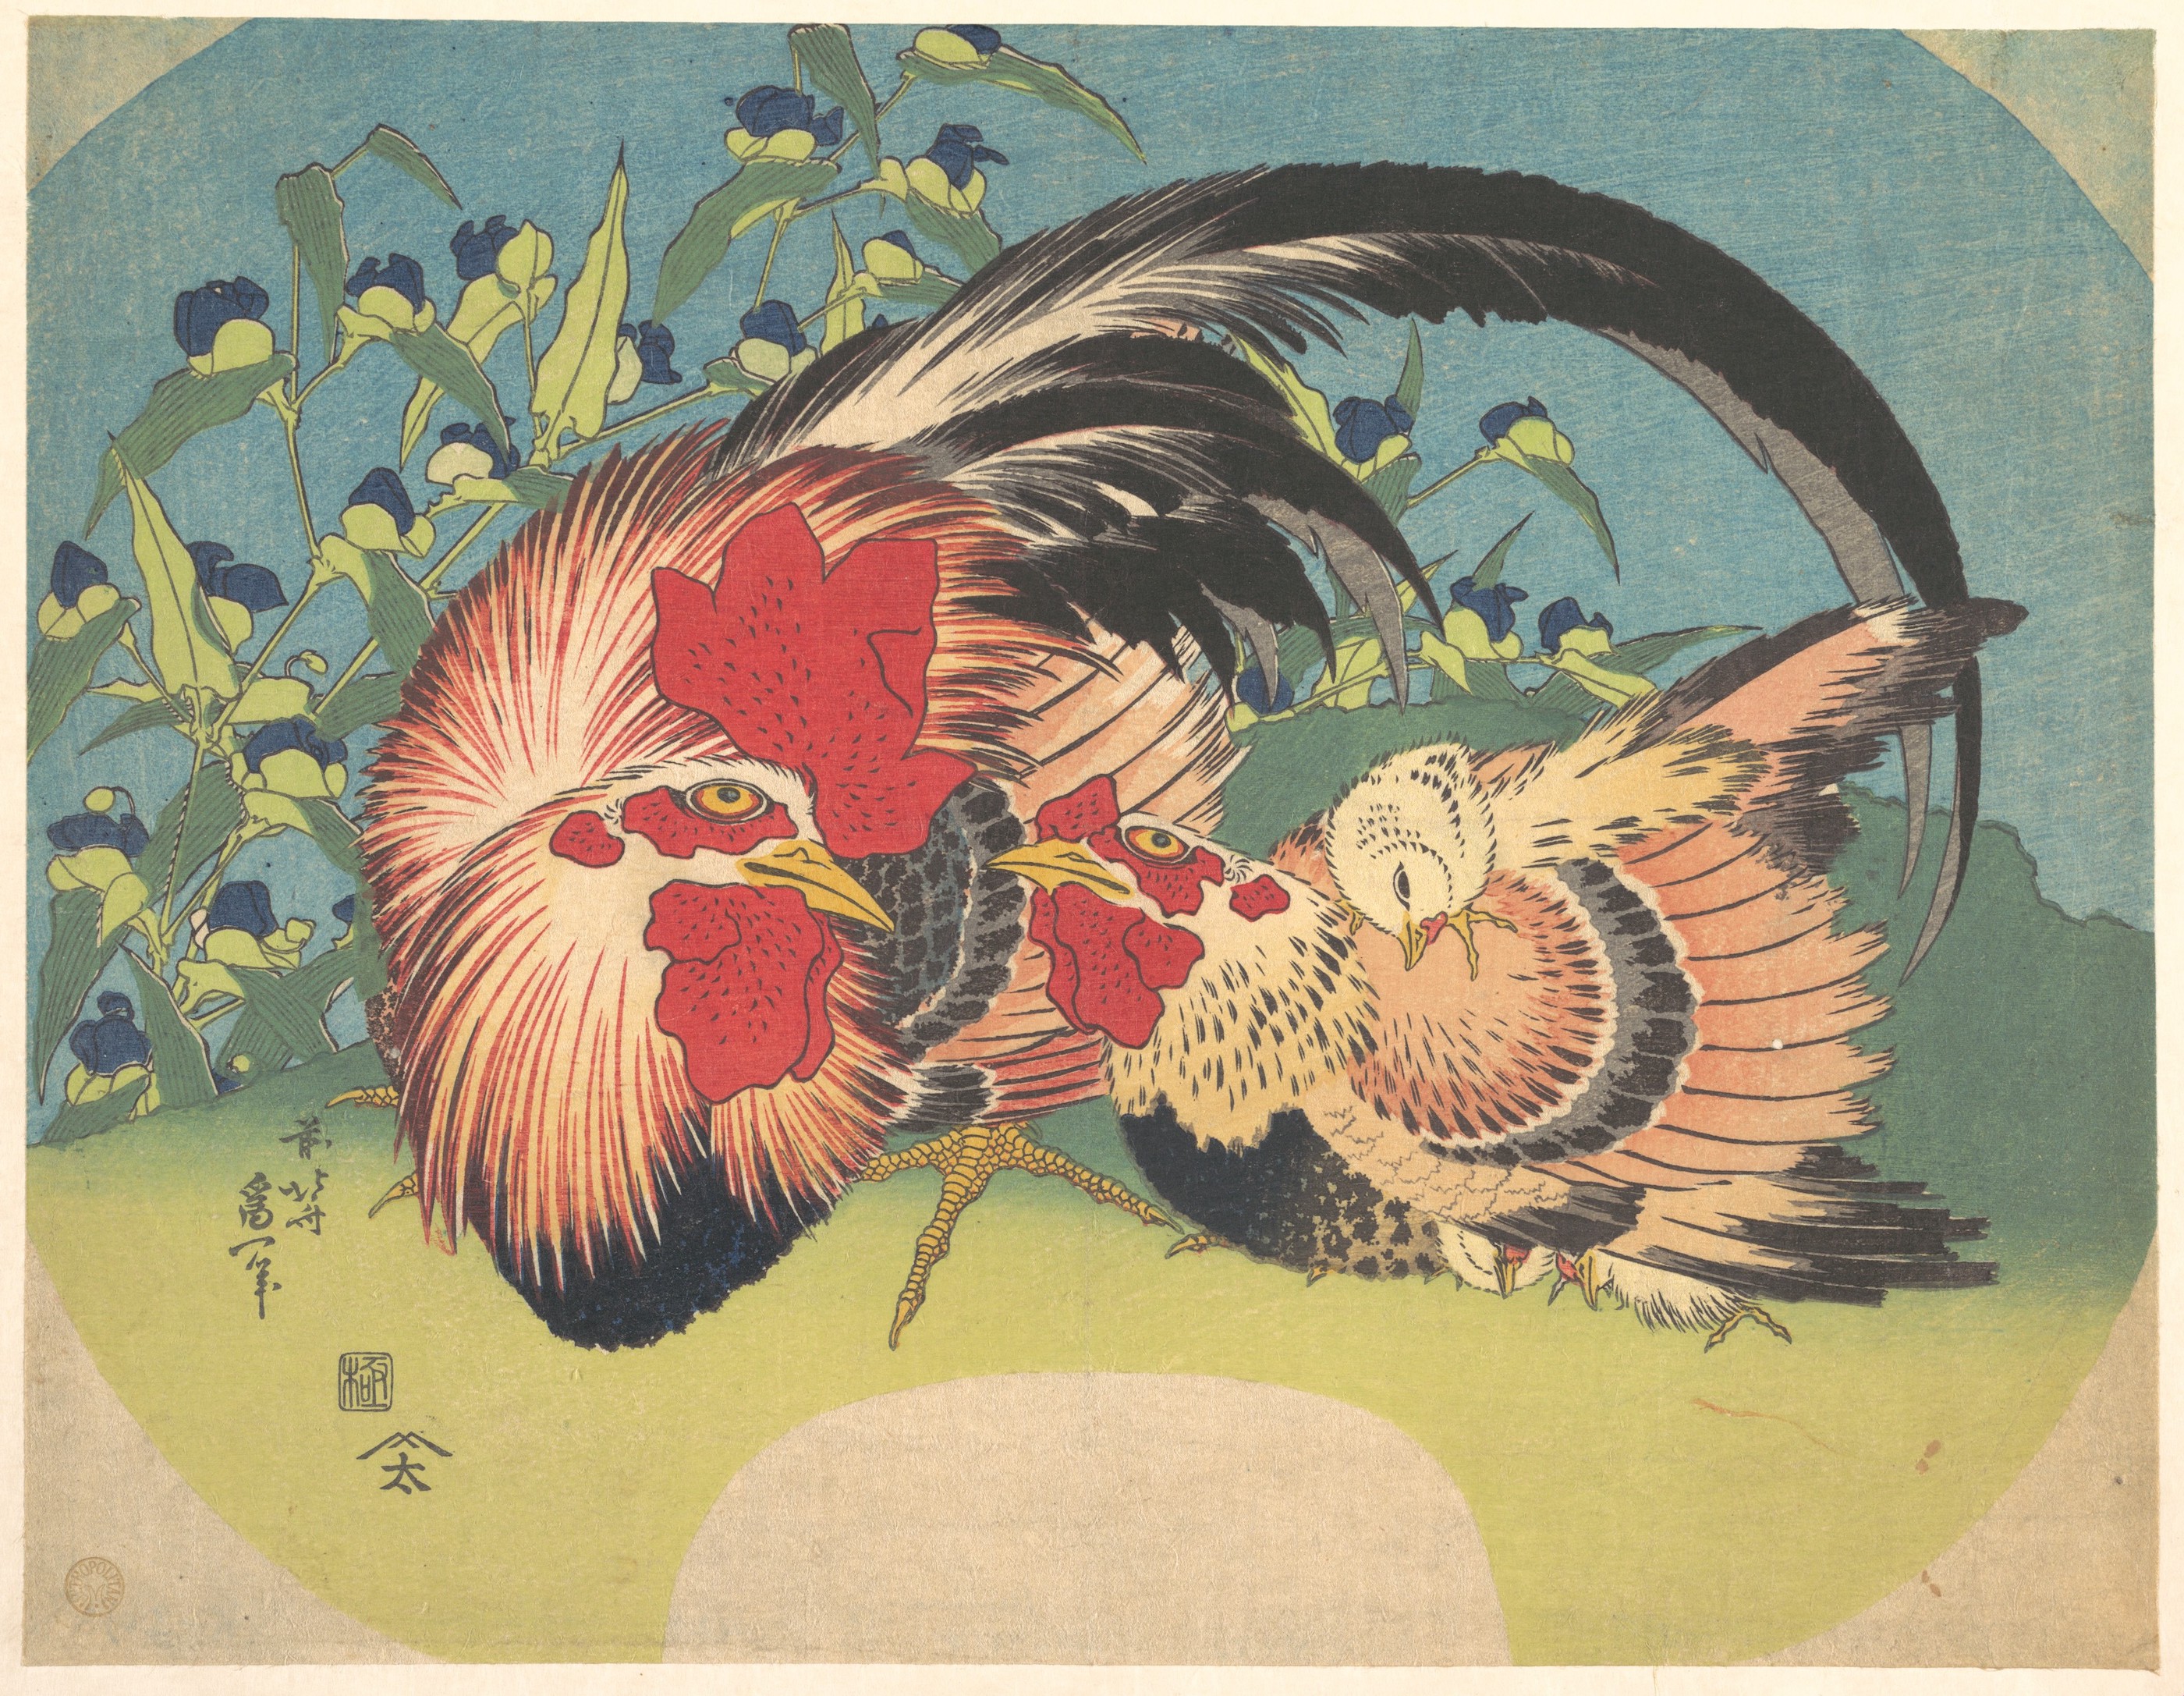 Rooster, Hen and Chicken with Spiderwort by Katsushika Hokusai - c.1830–33 - 22.9 x 29.2 cm Metropolitan Museum of Art